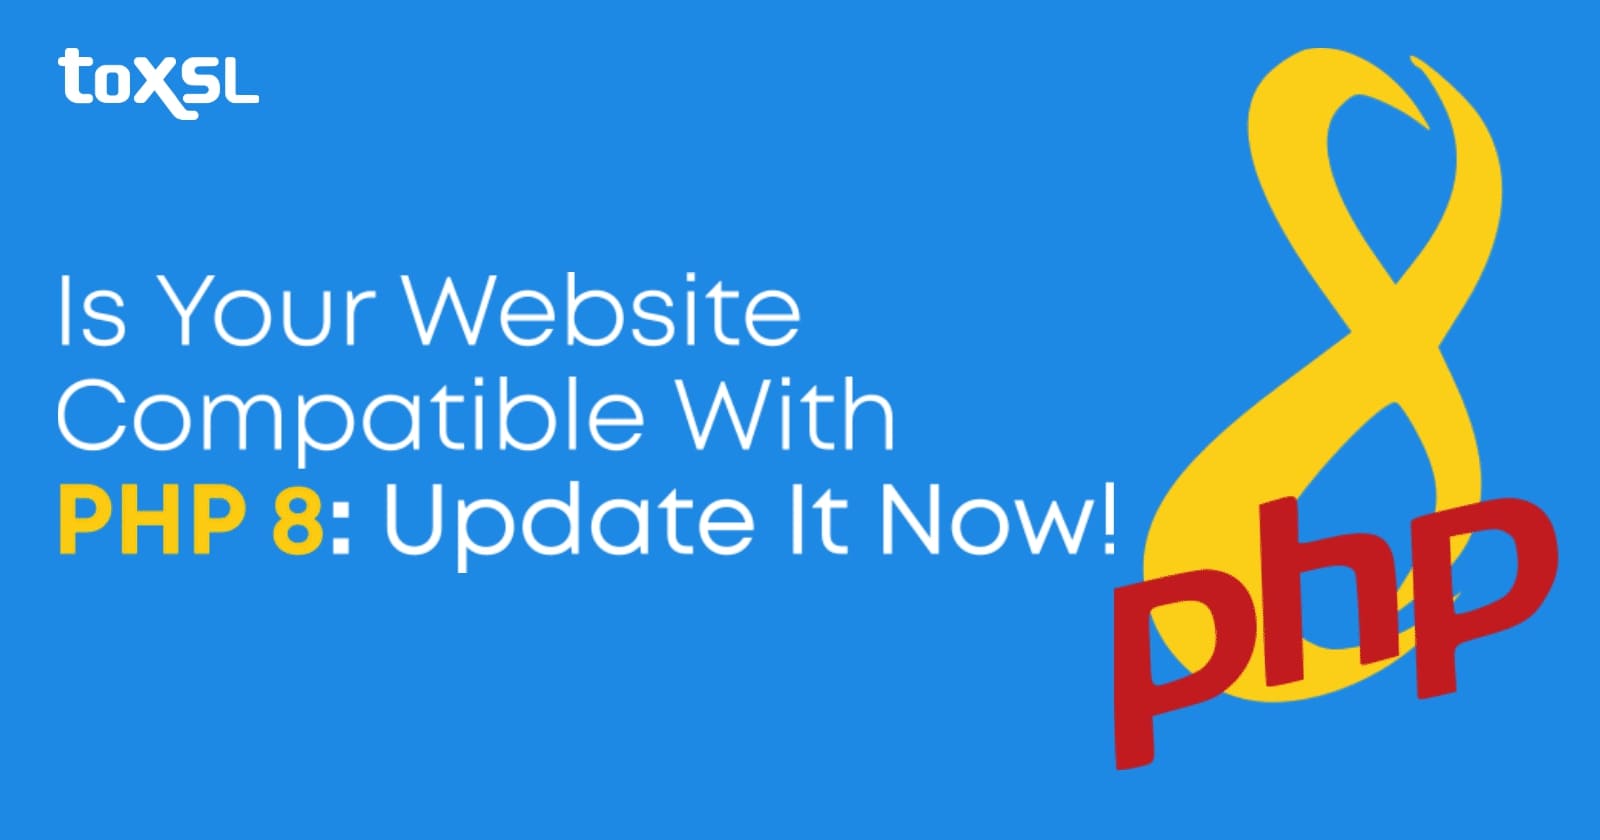 Is Your Website Compatible with PHP 8? Update it Now!